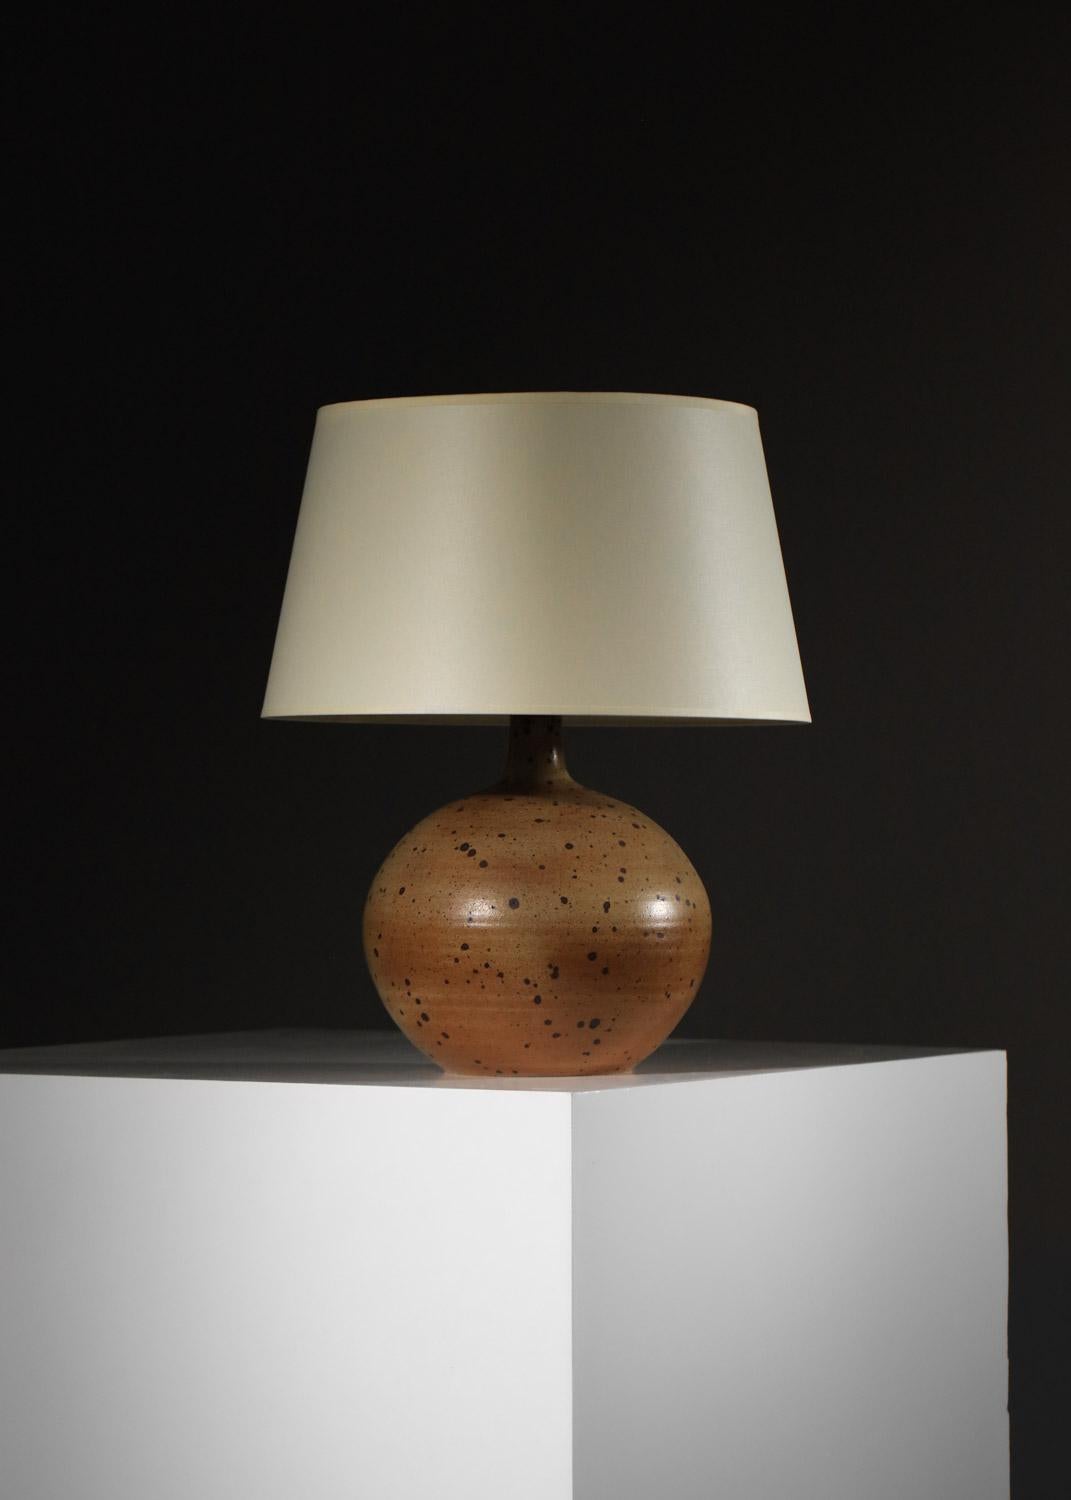 60's bedside or desk lamp by La Borne. Brown and speckled ceramic base structure, presentation shade sold on request and estimate. Very fine vintage condition, original electrical system (see photos). Recommended B22 LED bulb.